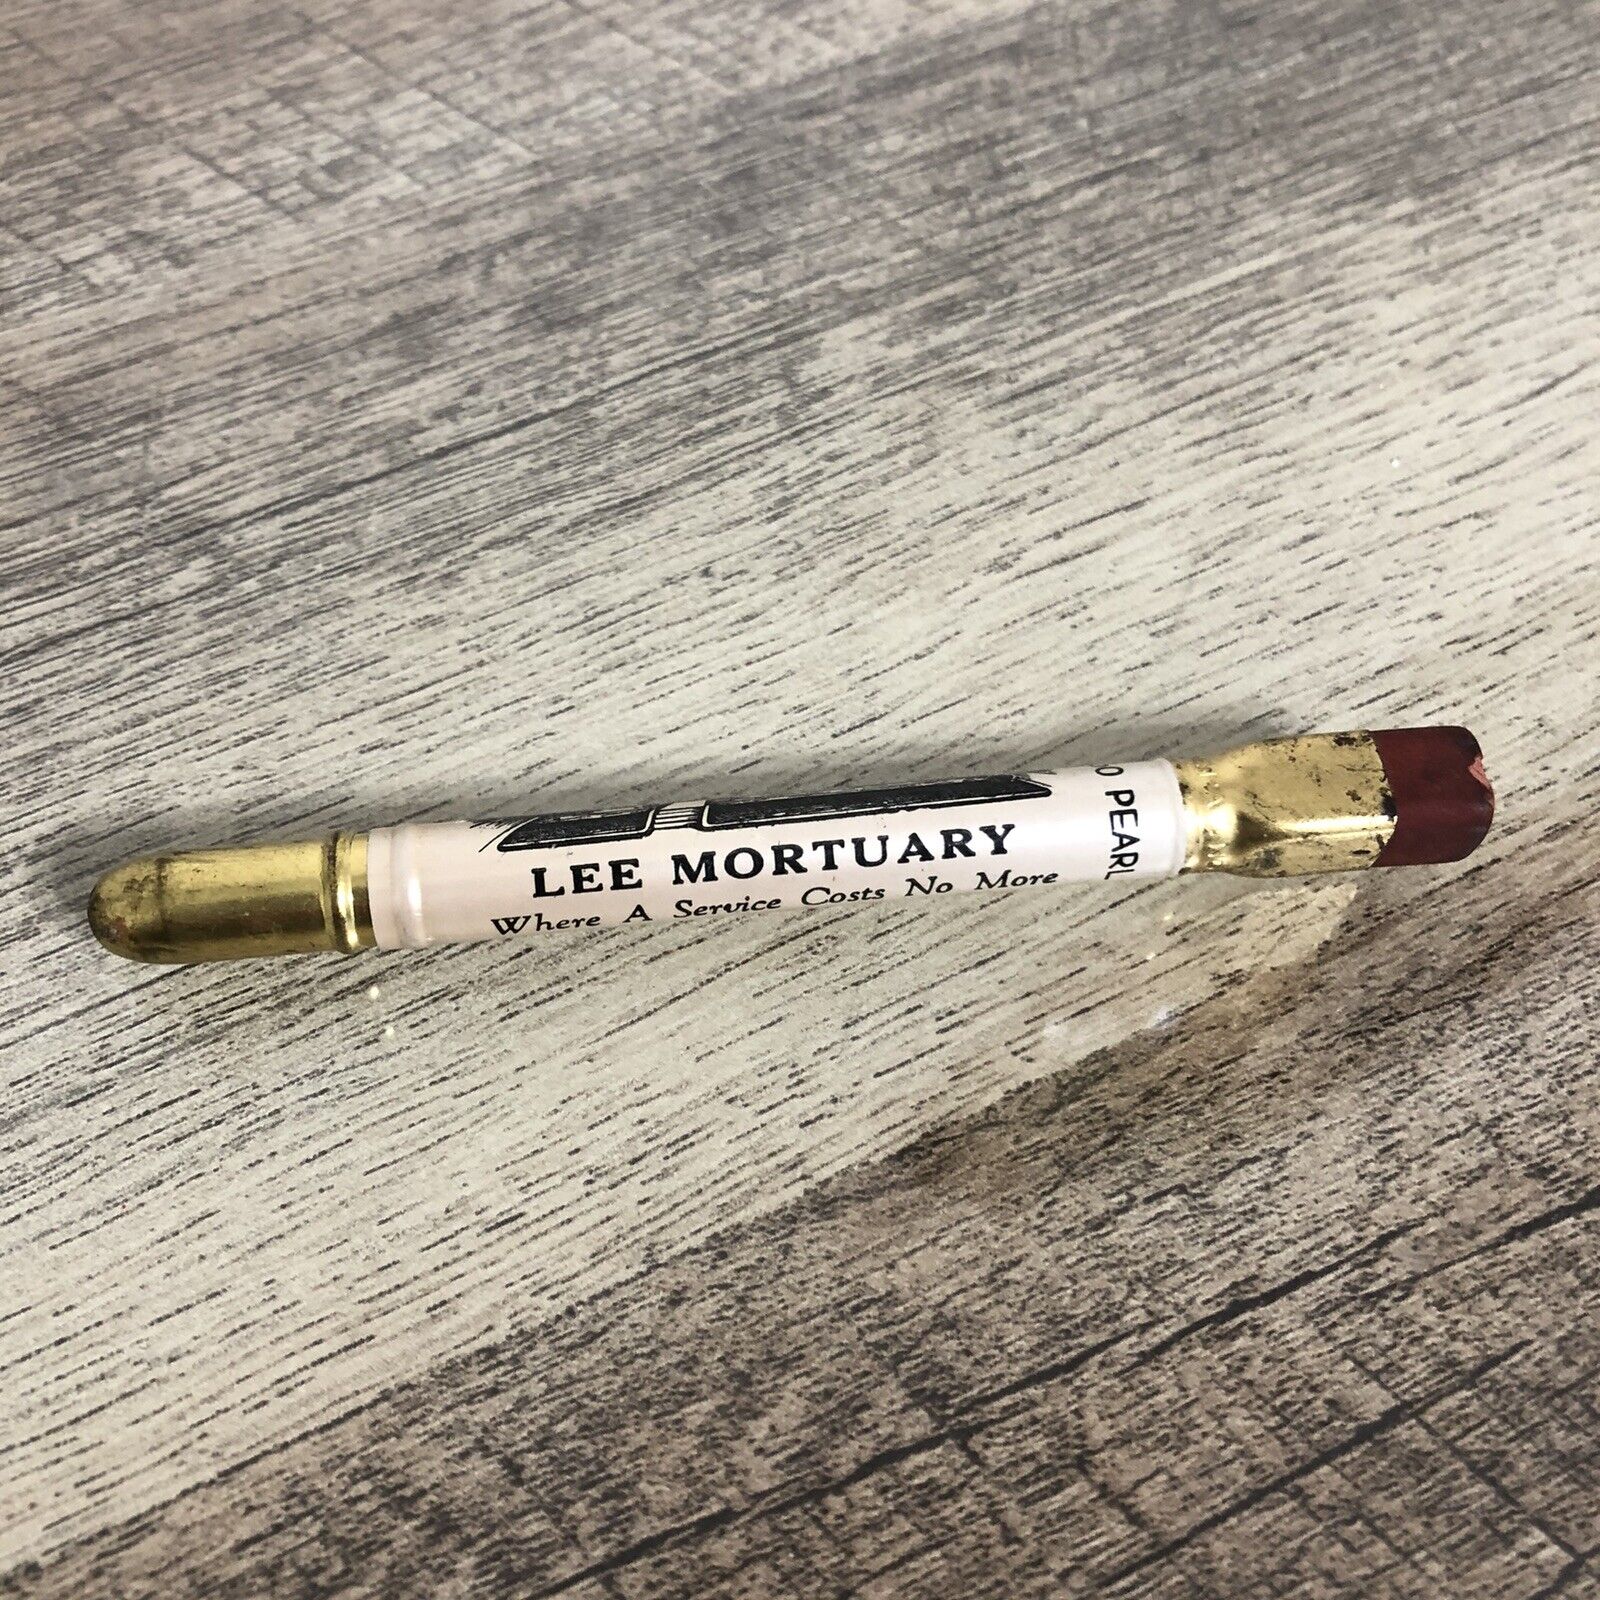 Vintage Bullet Pencil Advertising Lee Mortuary ~ Where a Service Cost No More